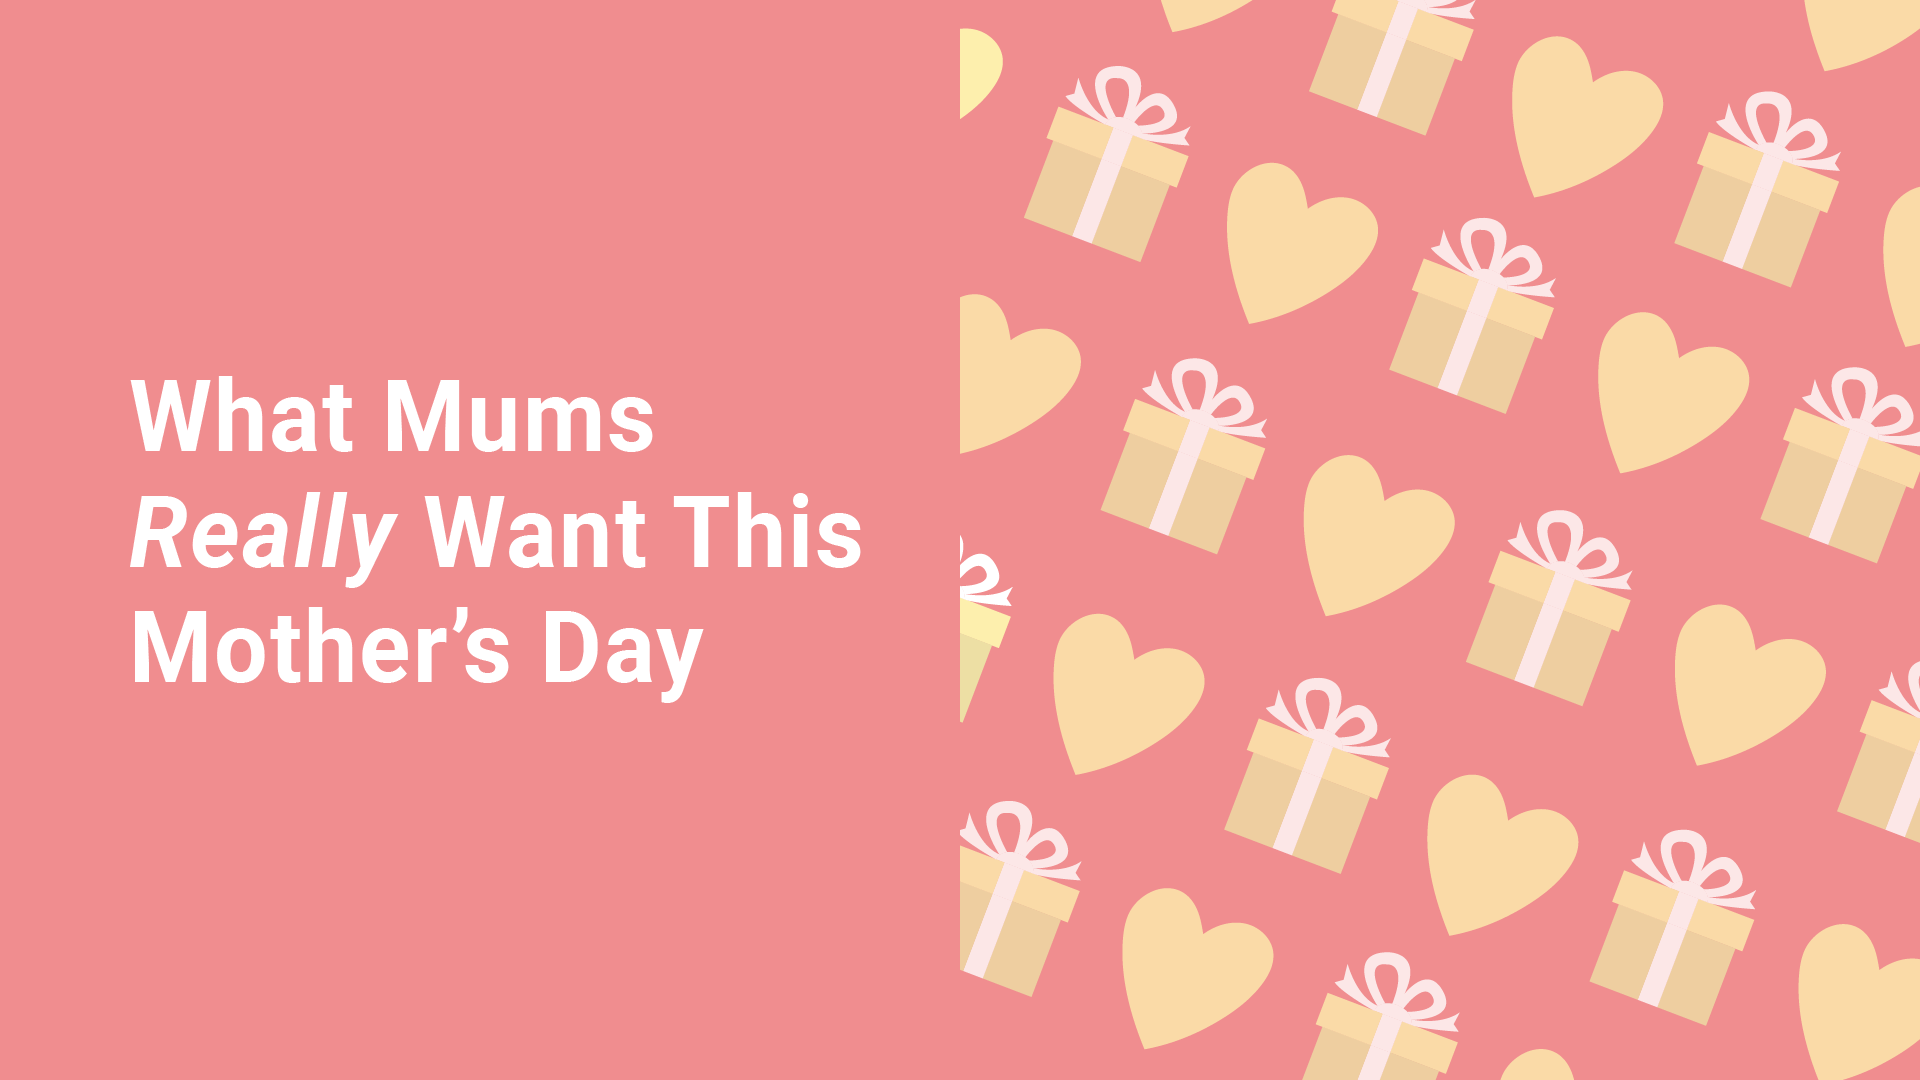 What mums really want this Mother's Day